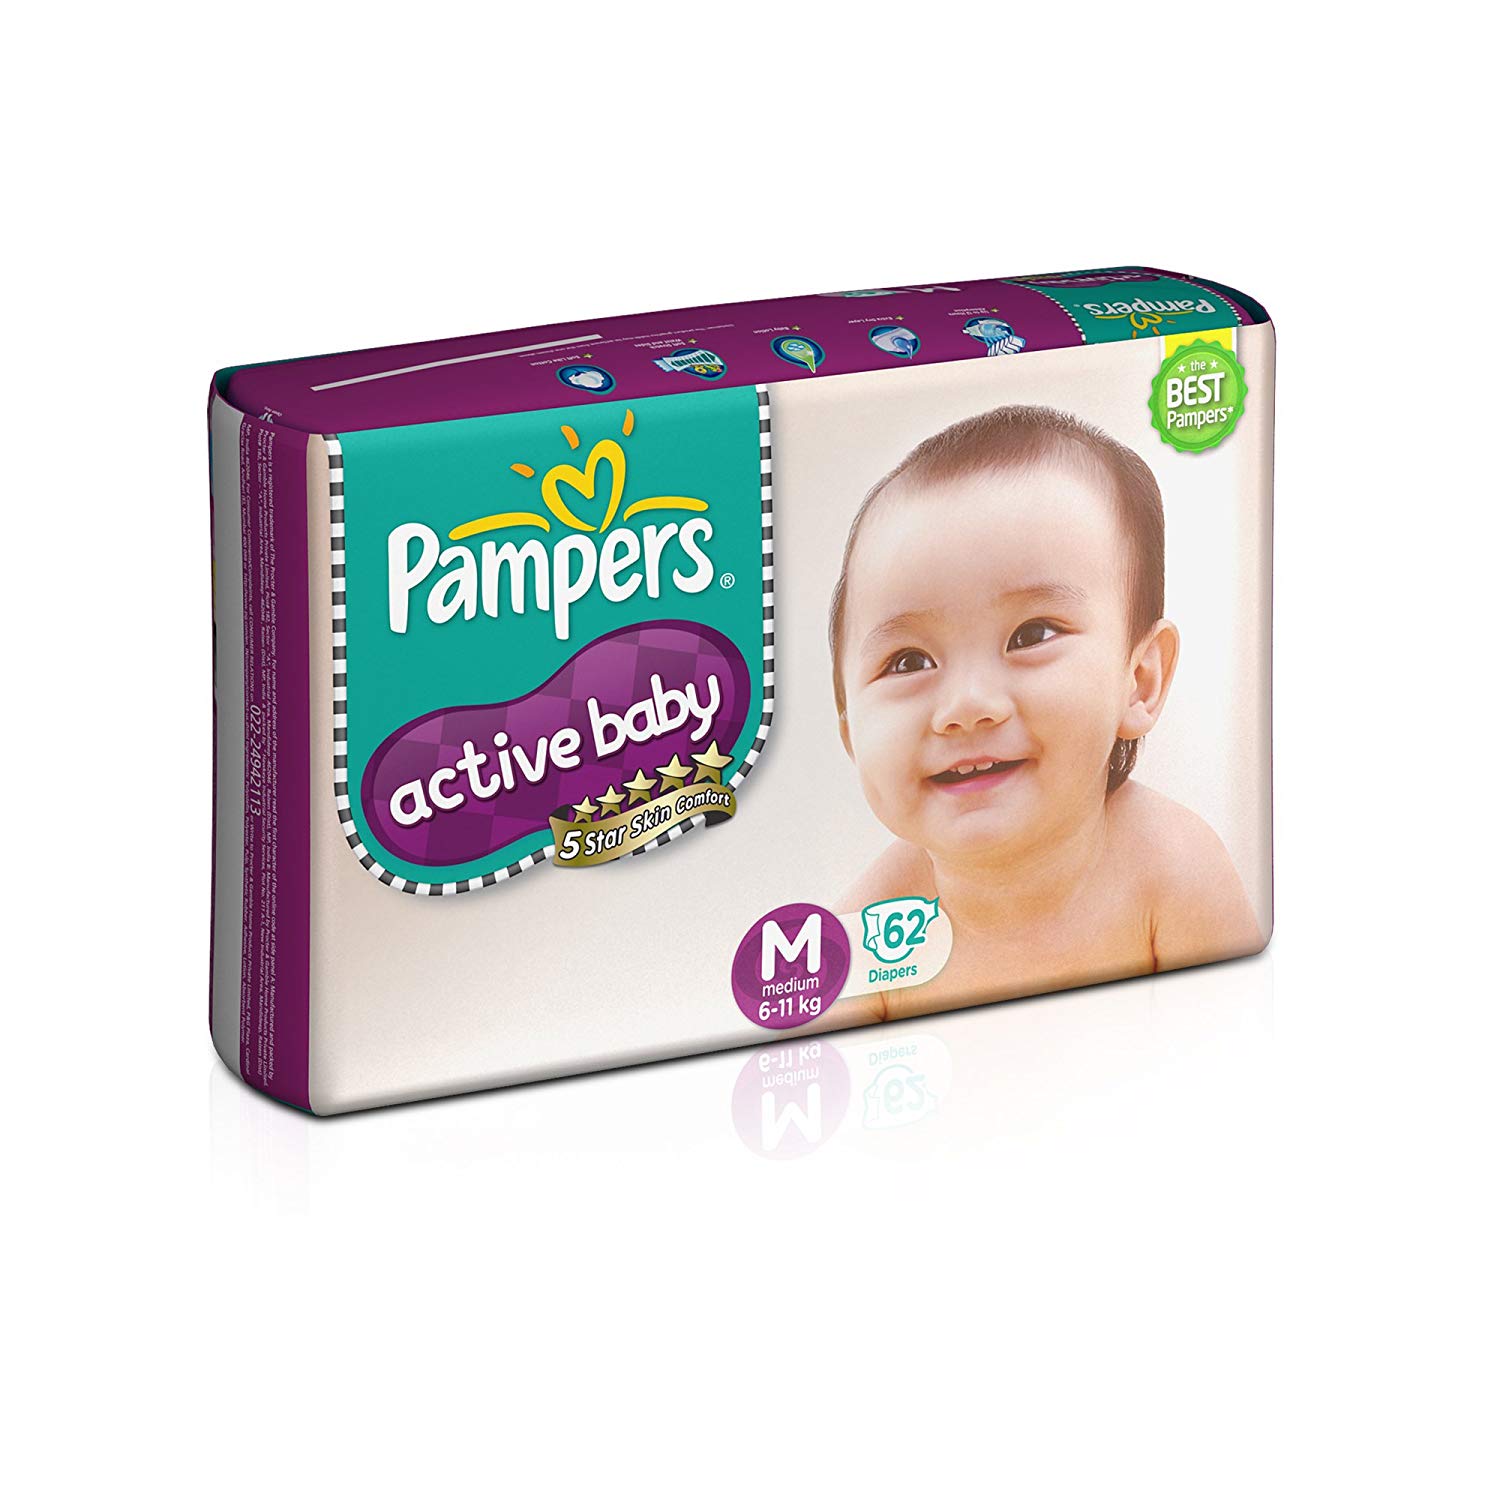 Pampers Active Baby Medium Size Diapers(62 Count)